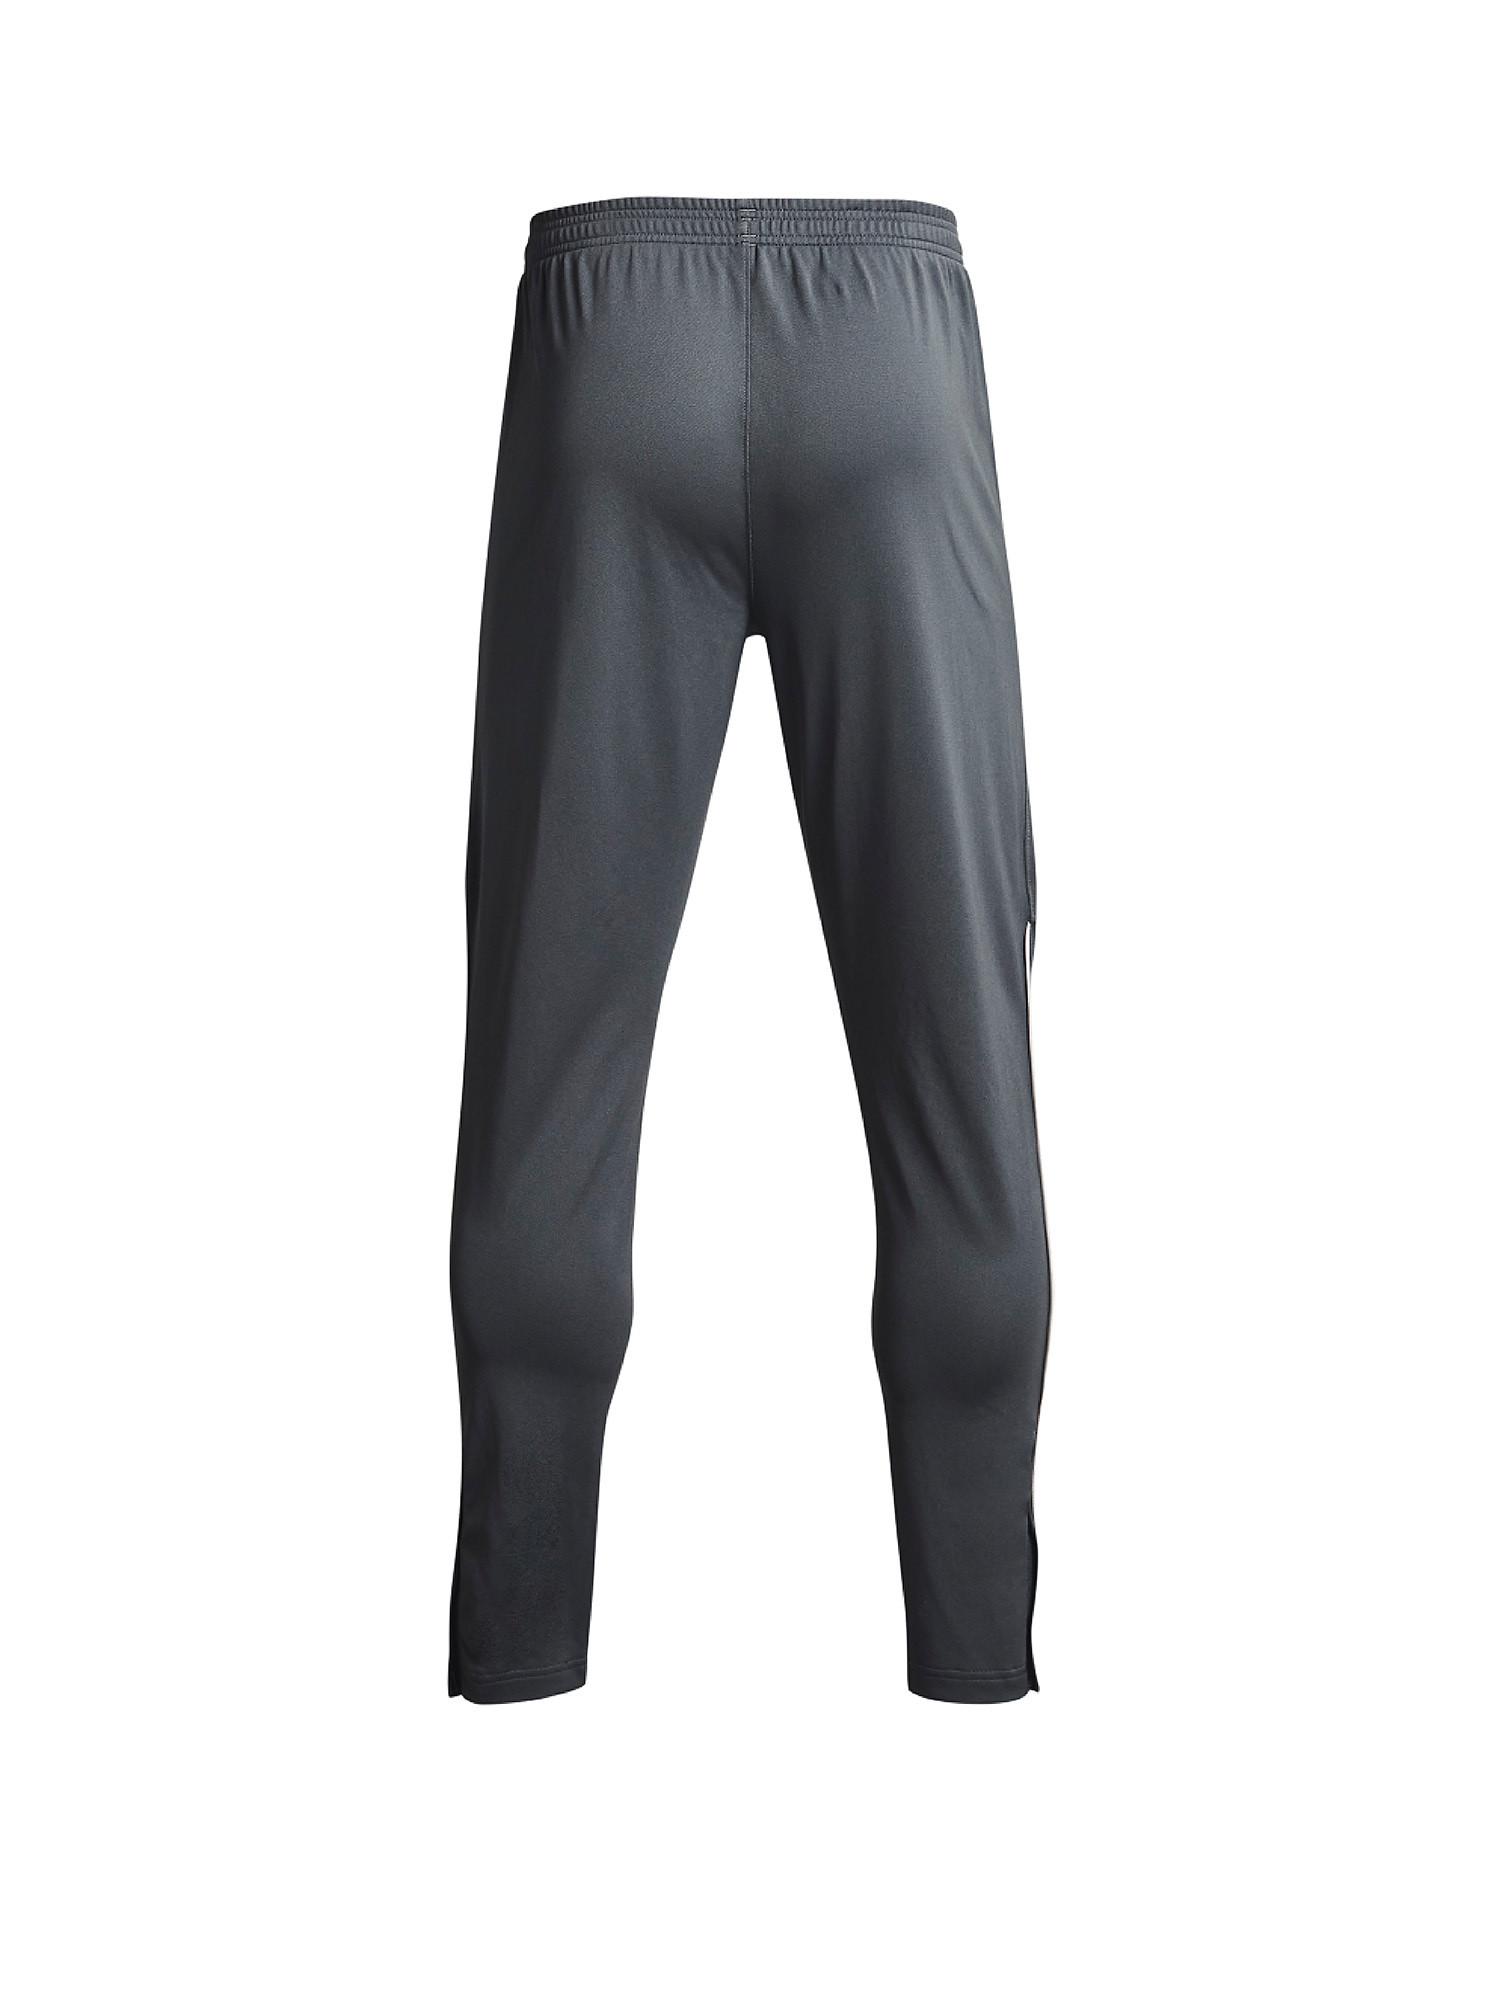 Under Armour - UA Pique Track Pants, Anthracite, large image number 1